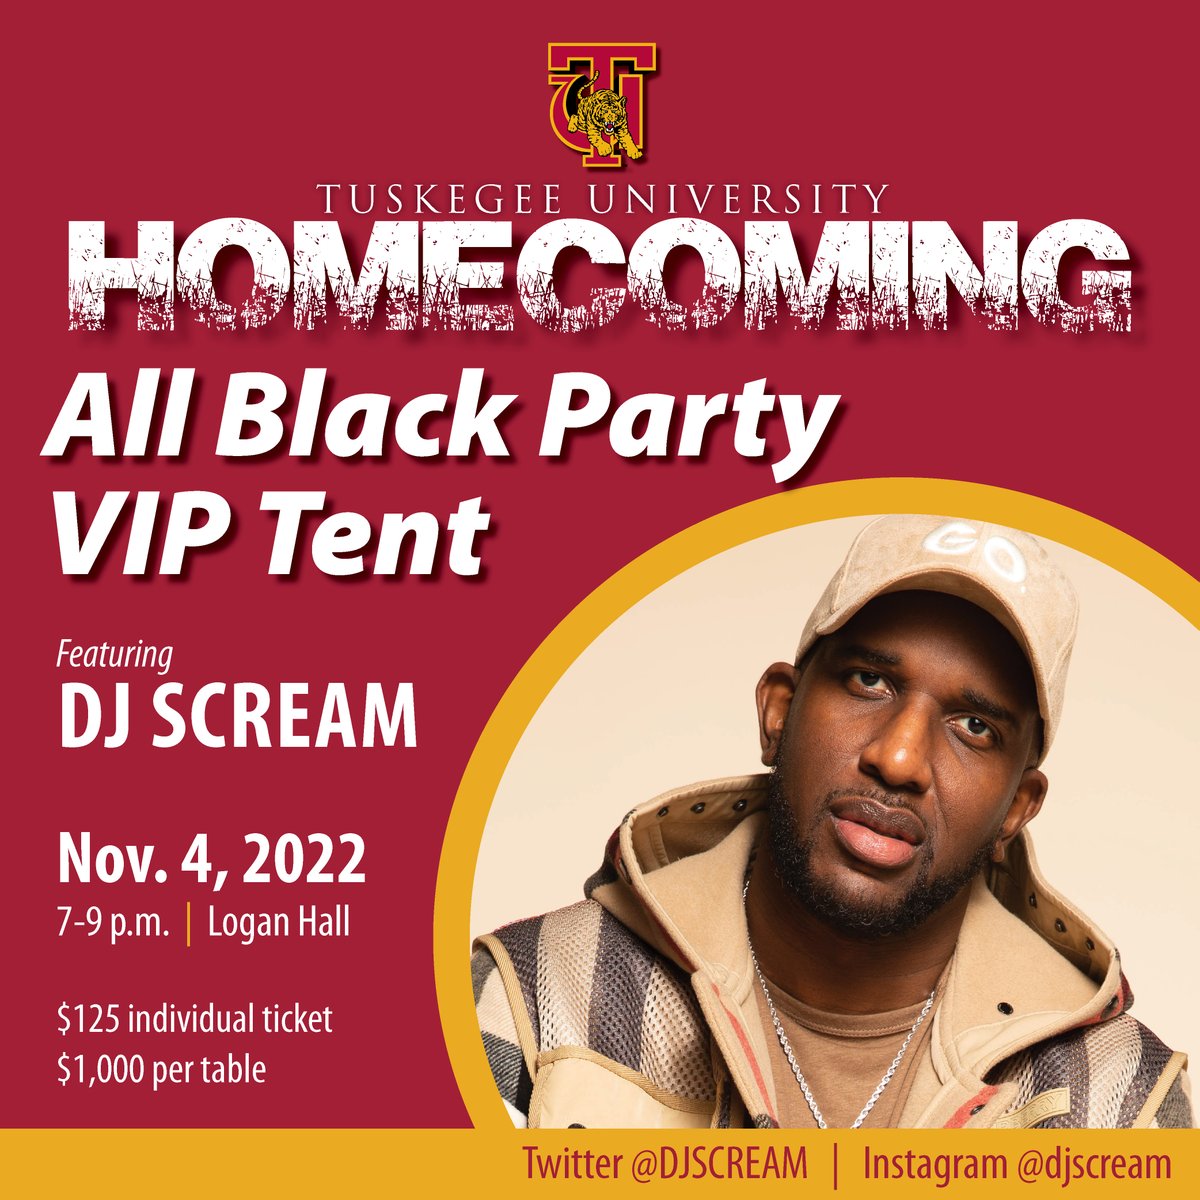 Alumni join us for the All-Black Party VIP Tent tonight from 7-9 p.m. with DJ Scream! Purchase tickets at: eventbrite.com/e/all-black-pa… #TUHC22 #OneTuskegee #GoldenTigers #TuskegeeUniversity